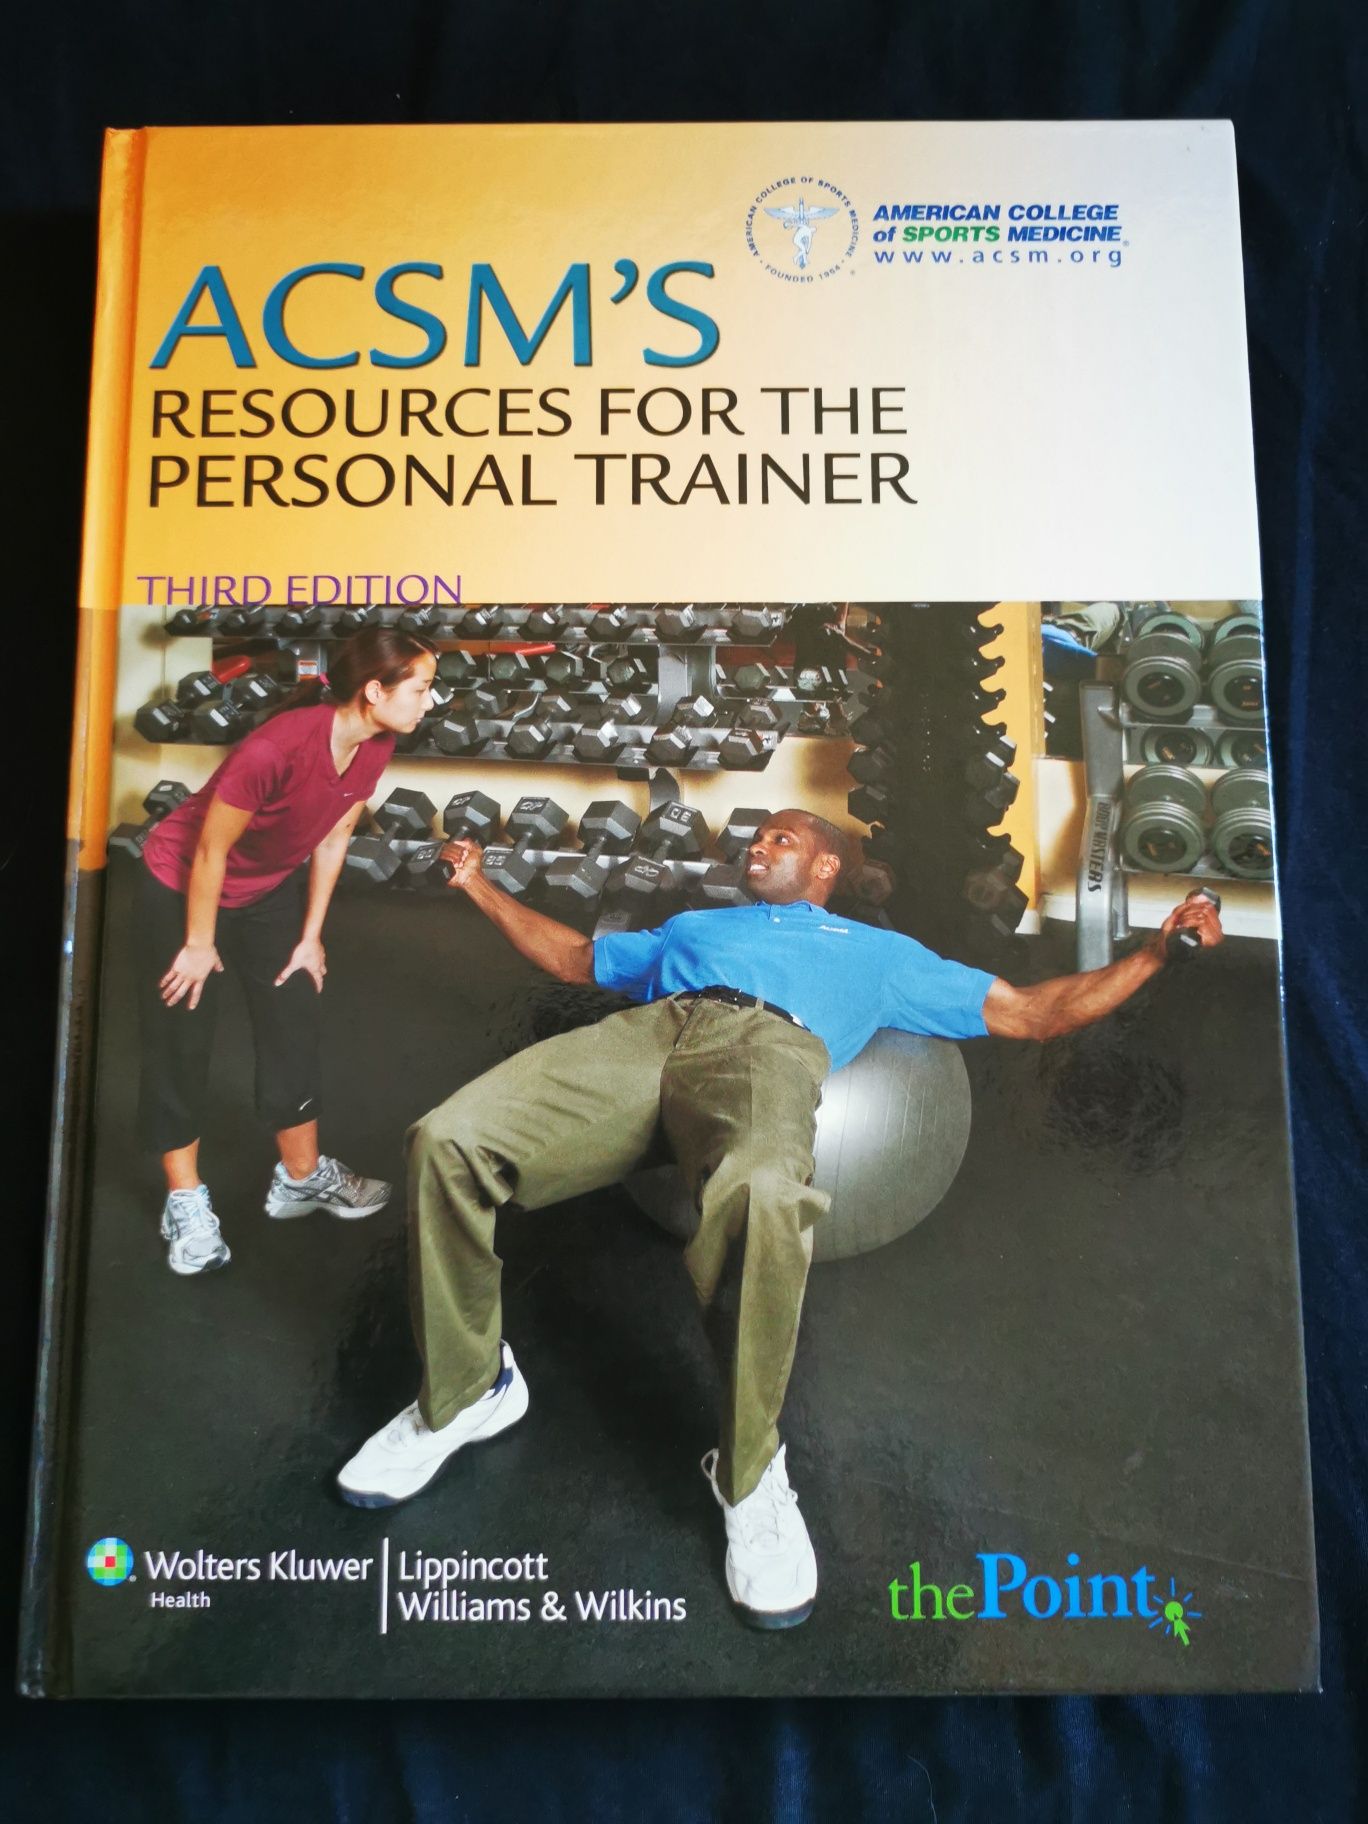 ACSM resources for the personal trainer